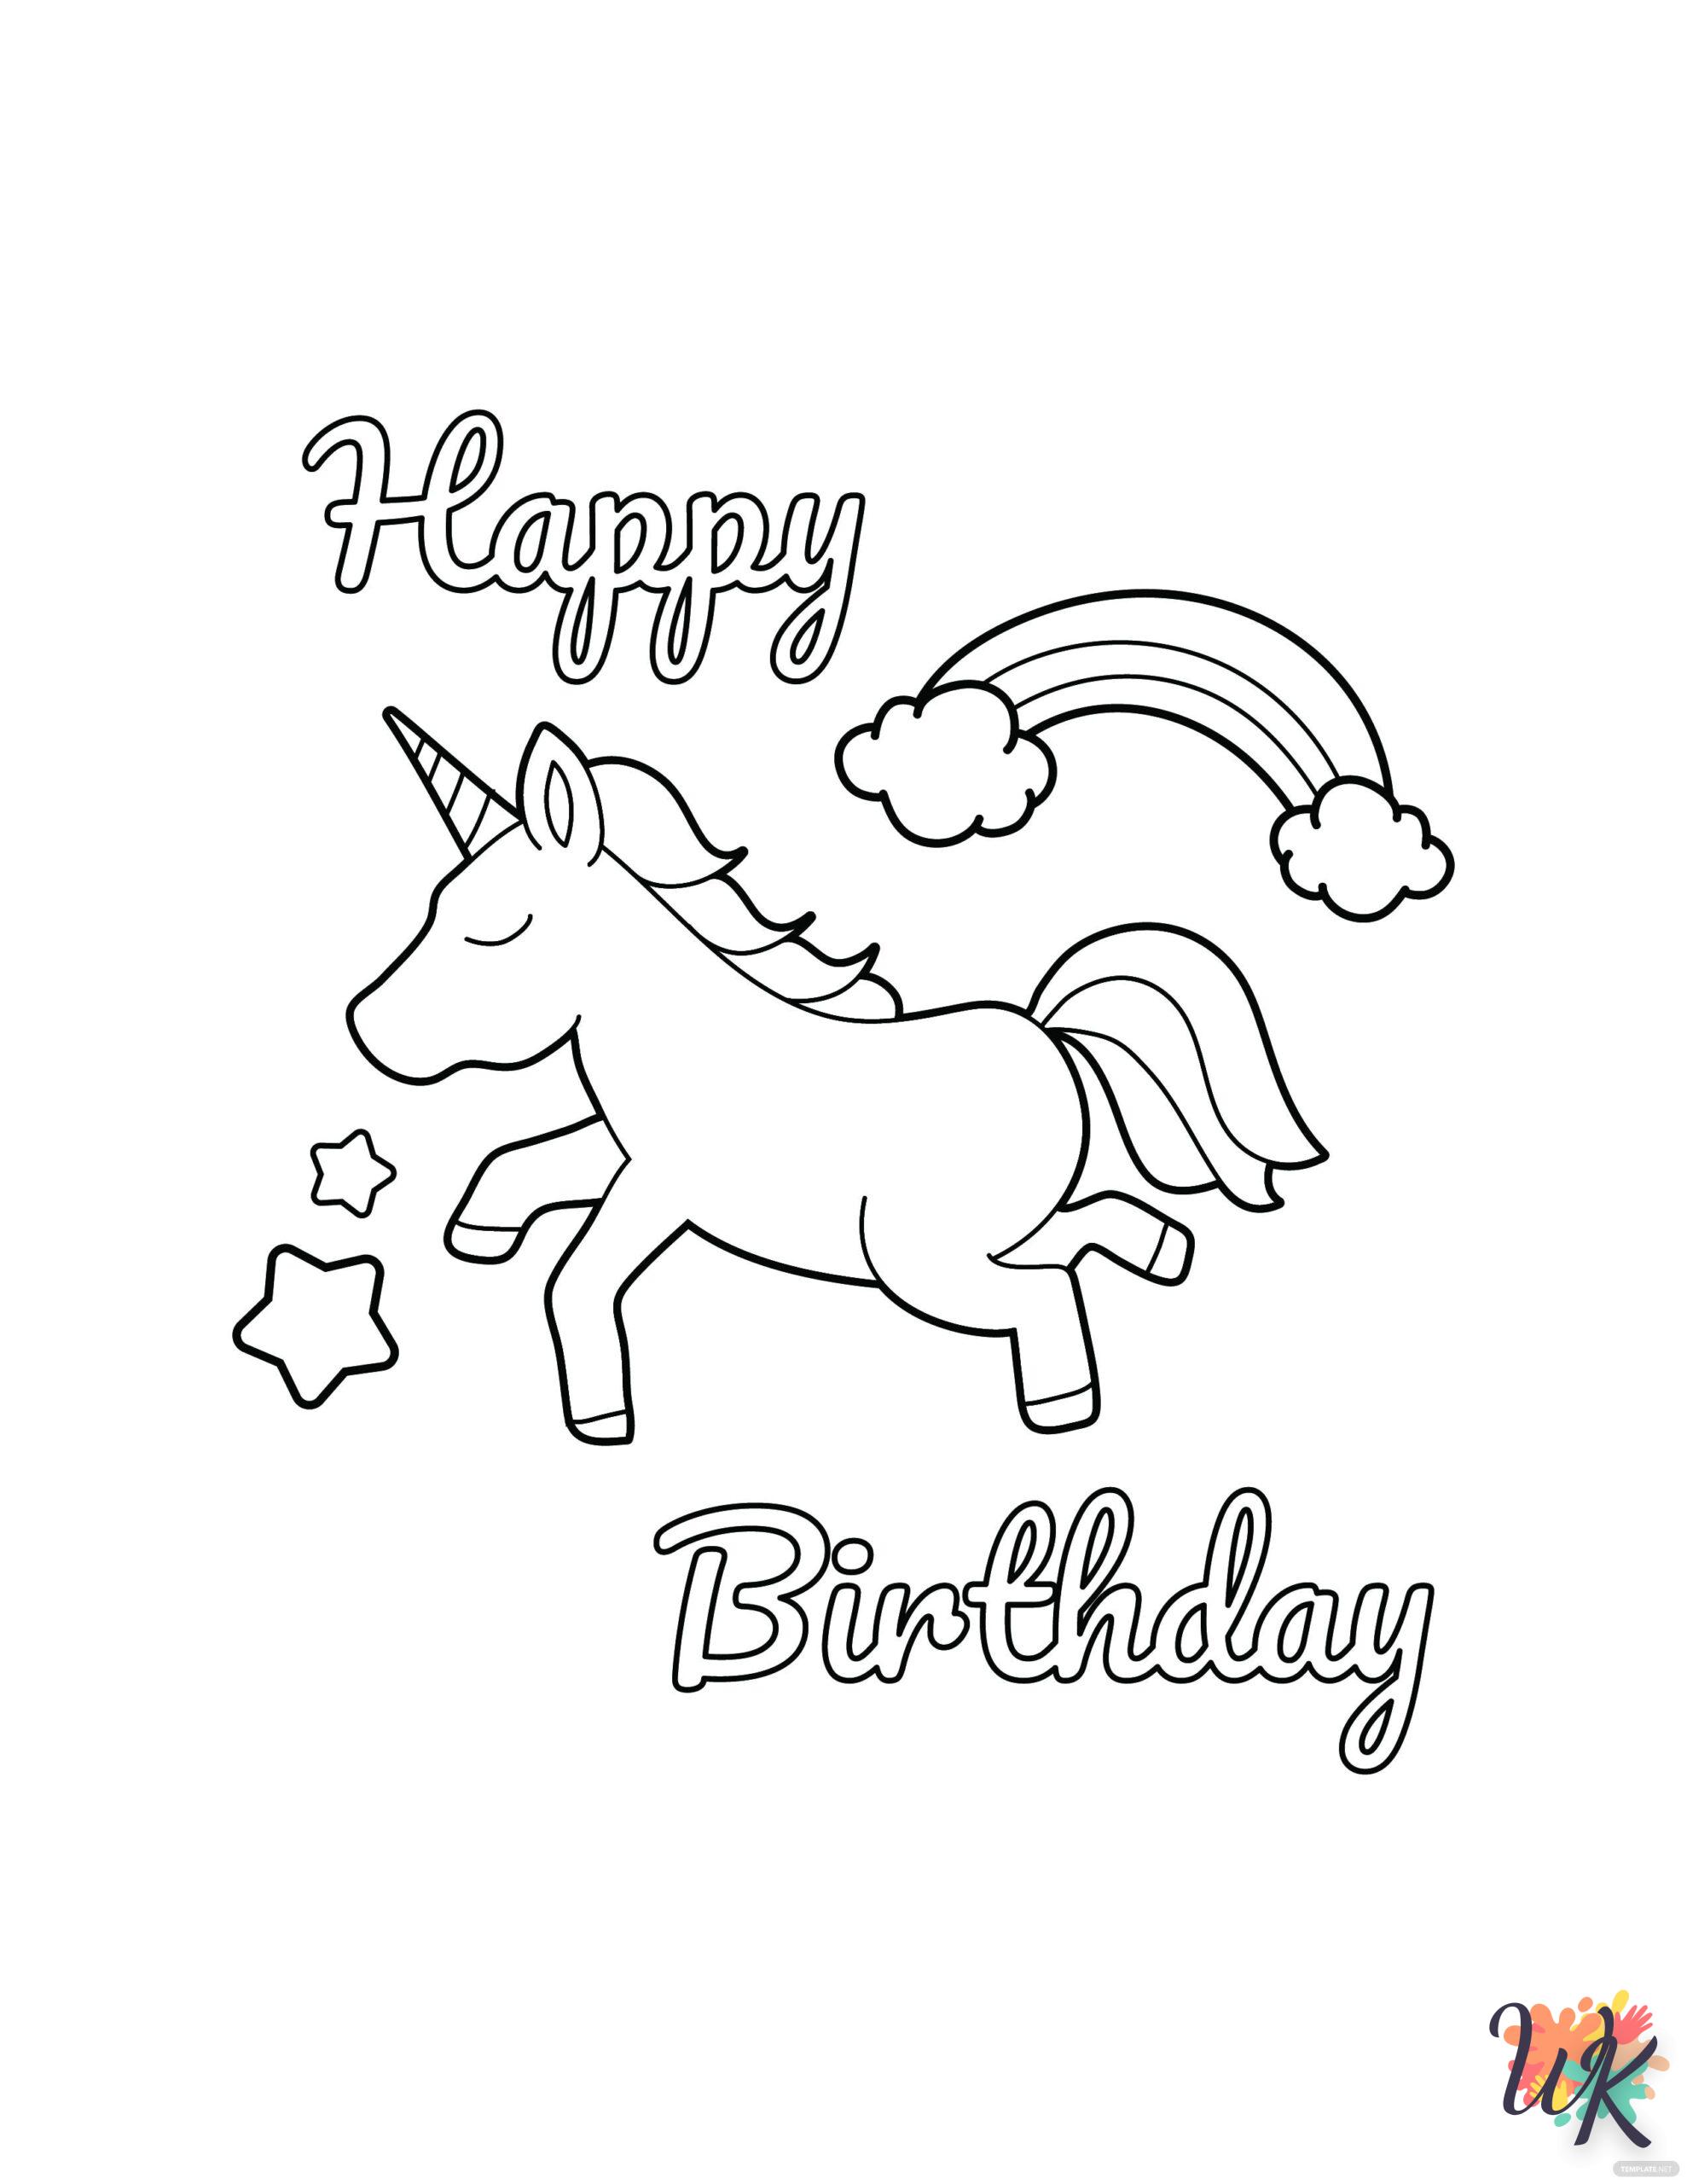 Unicorn ornament coloring pages